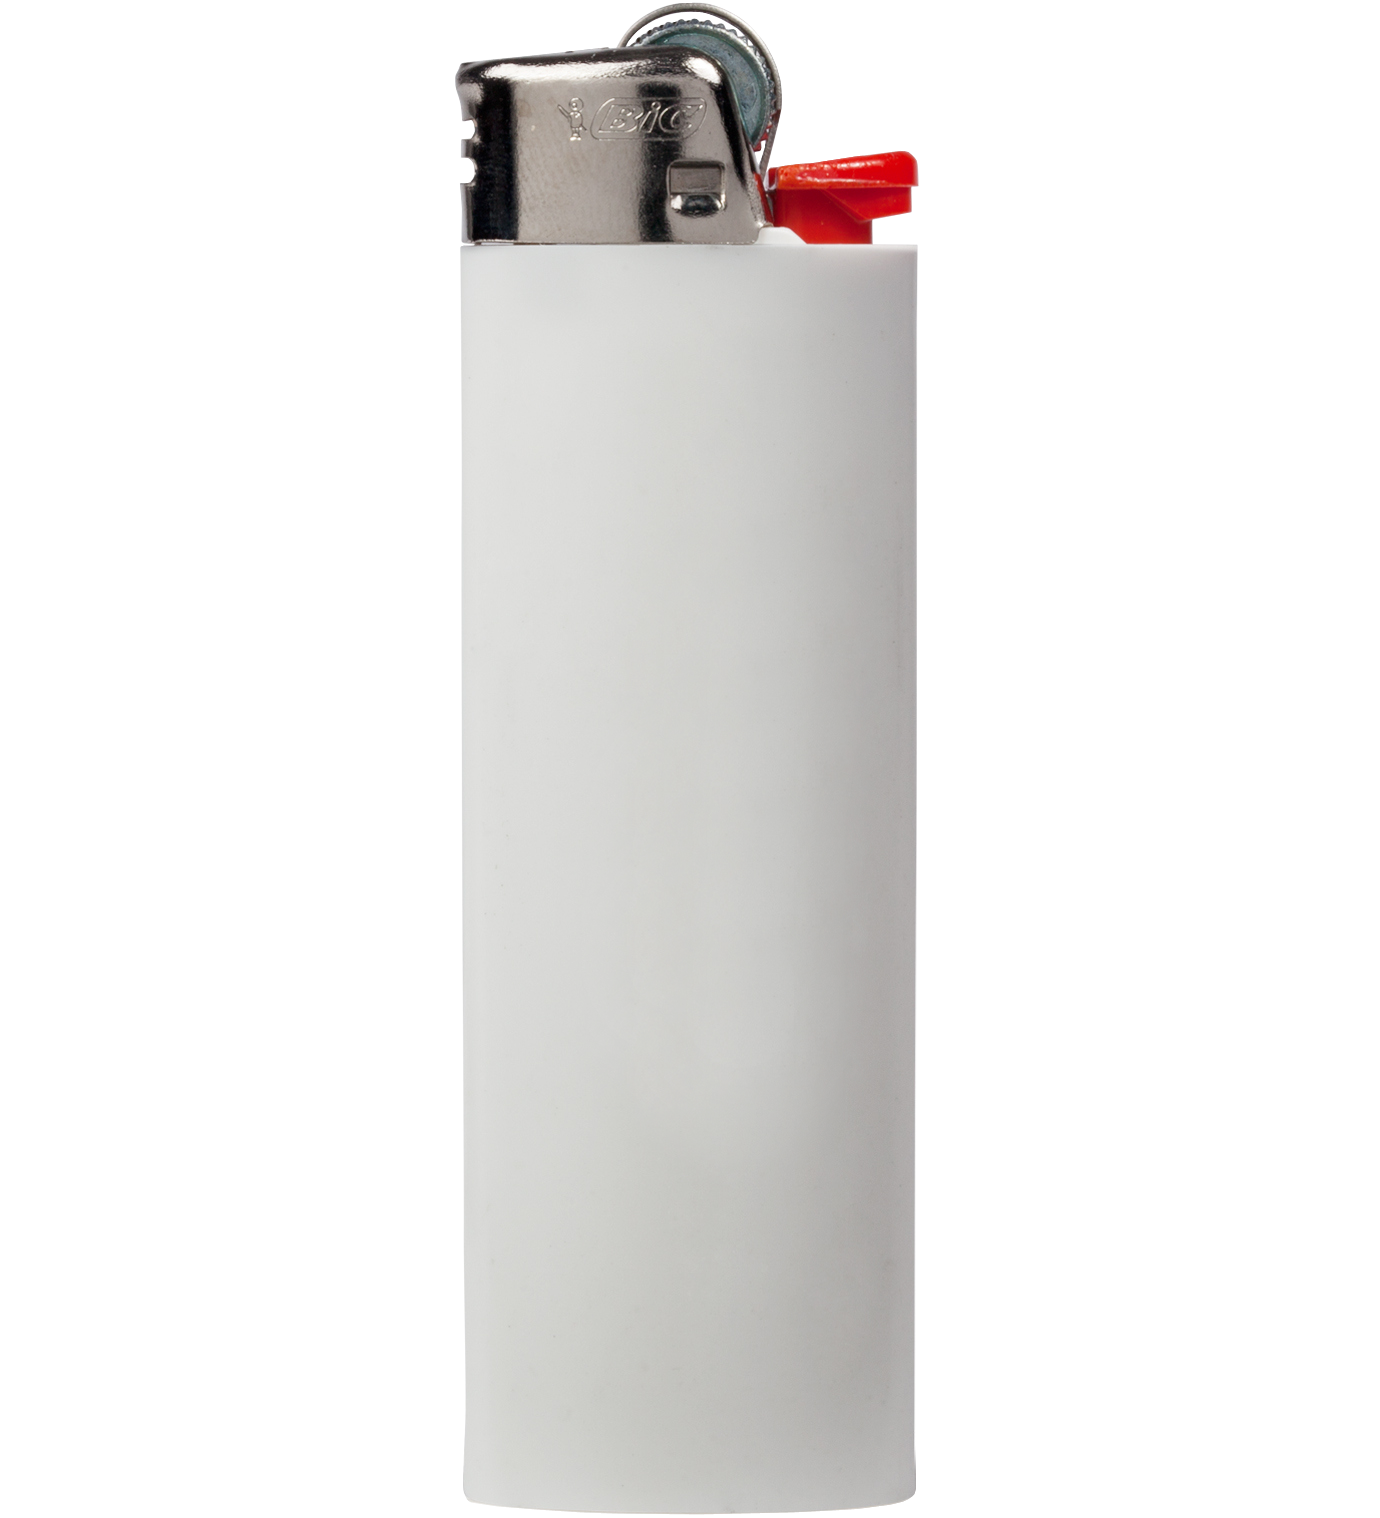 Lighter zippo png image. Gas clipart cylender